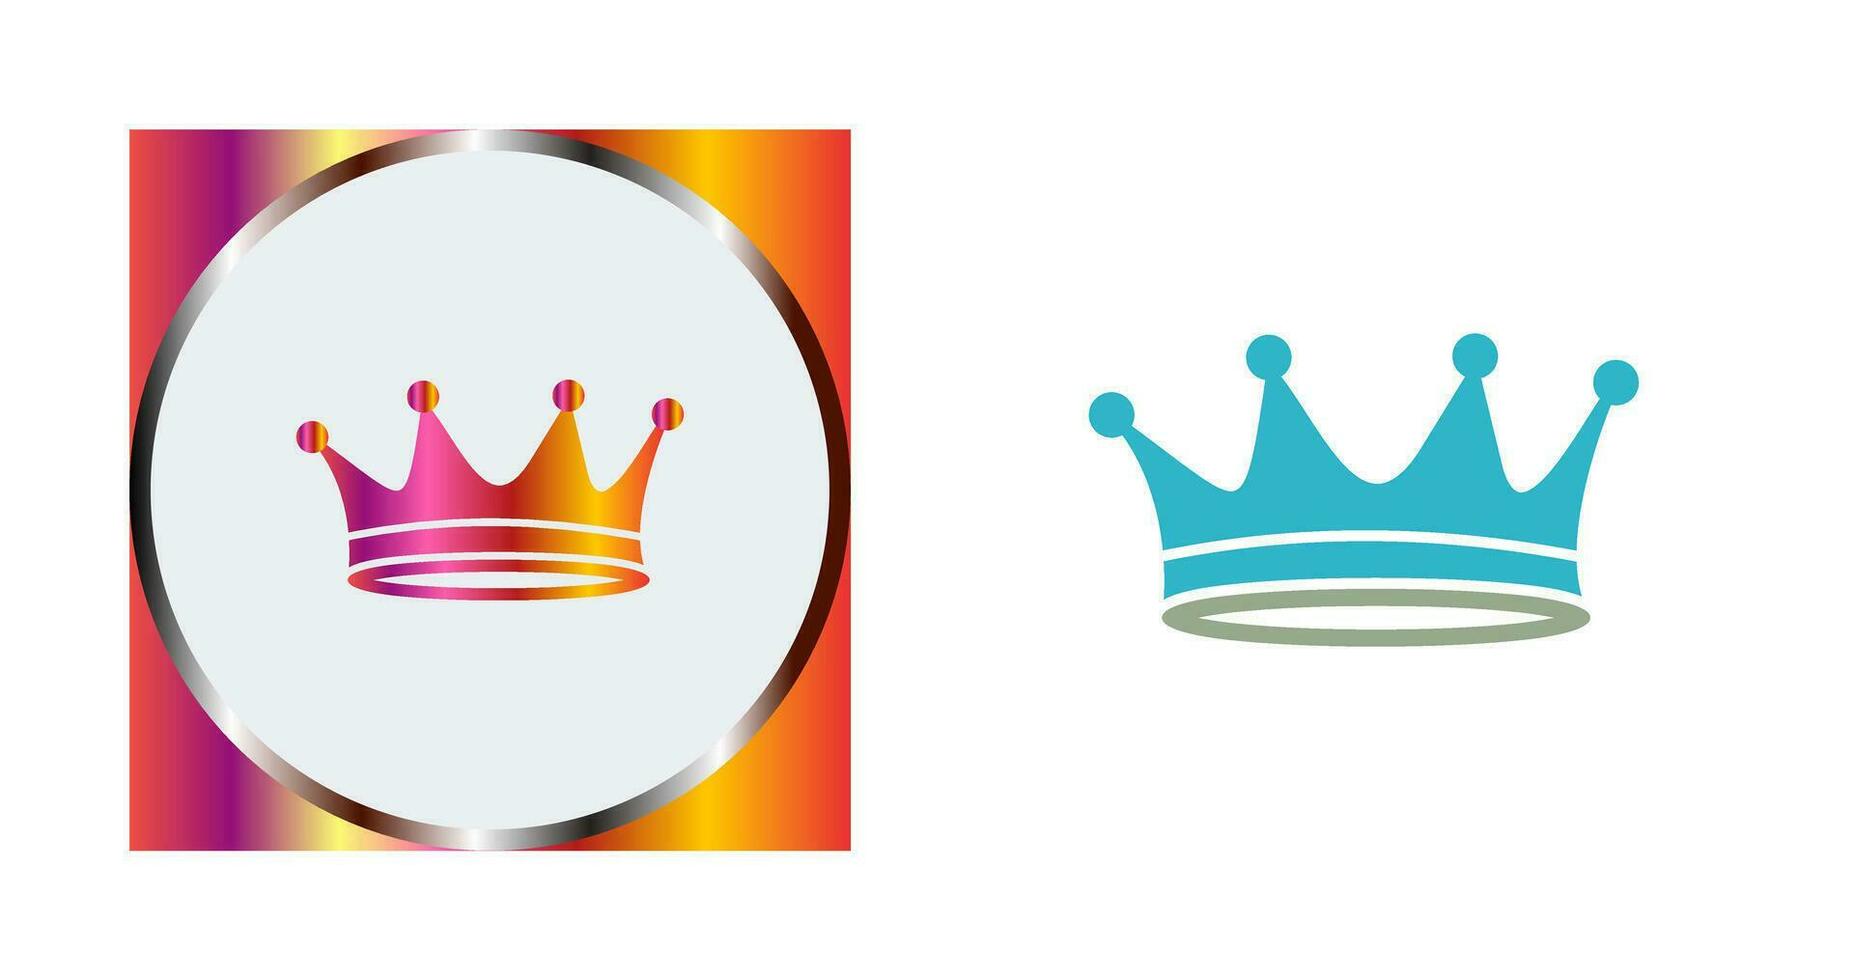 King Crown Vector Icon